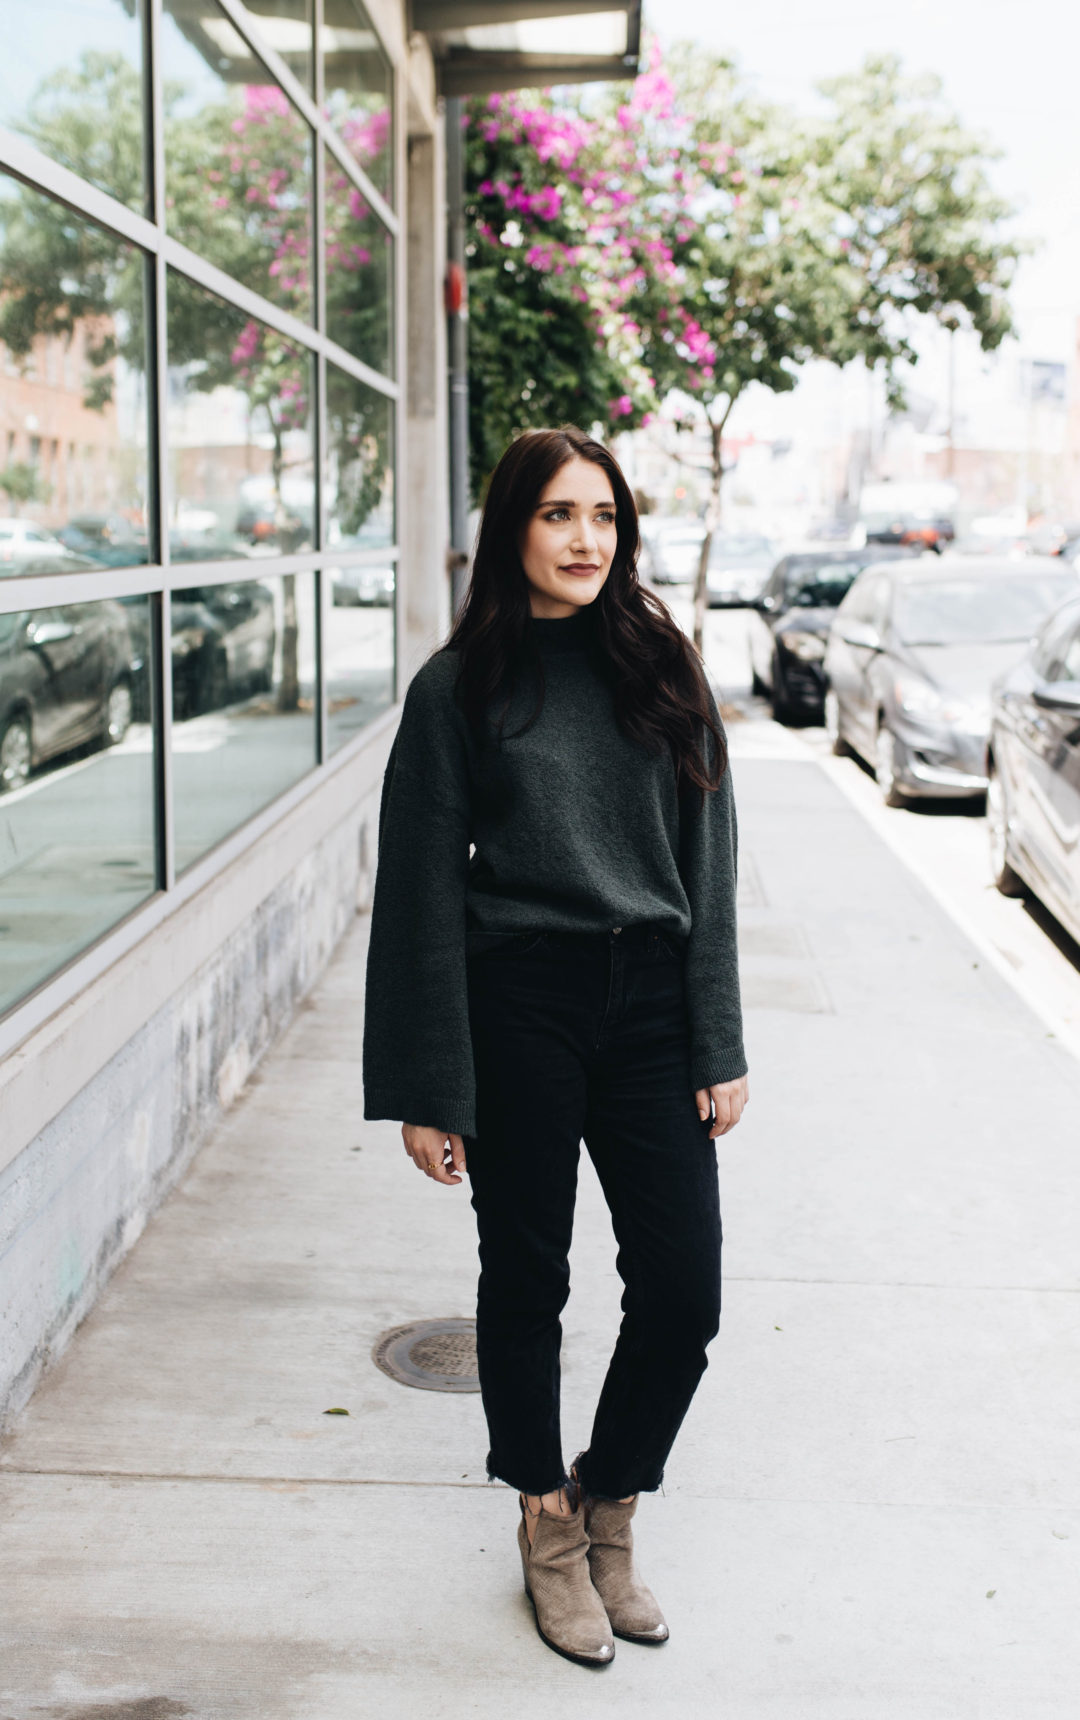 Bell Sleeves & Boots | Twinspiration